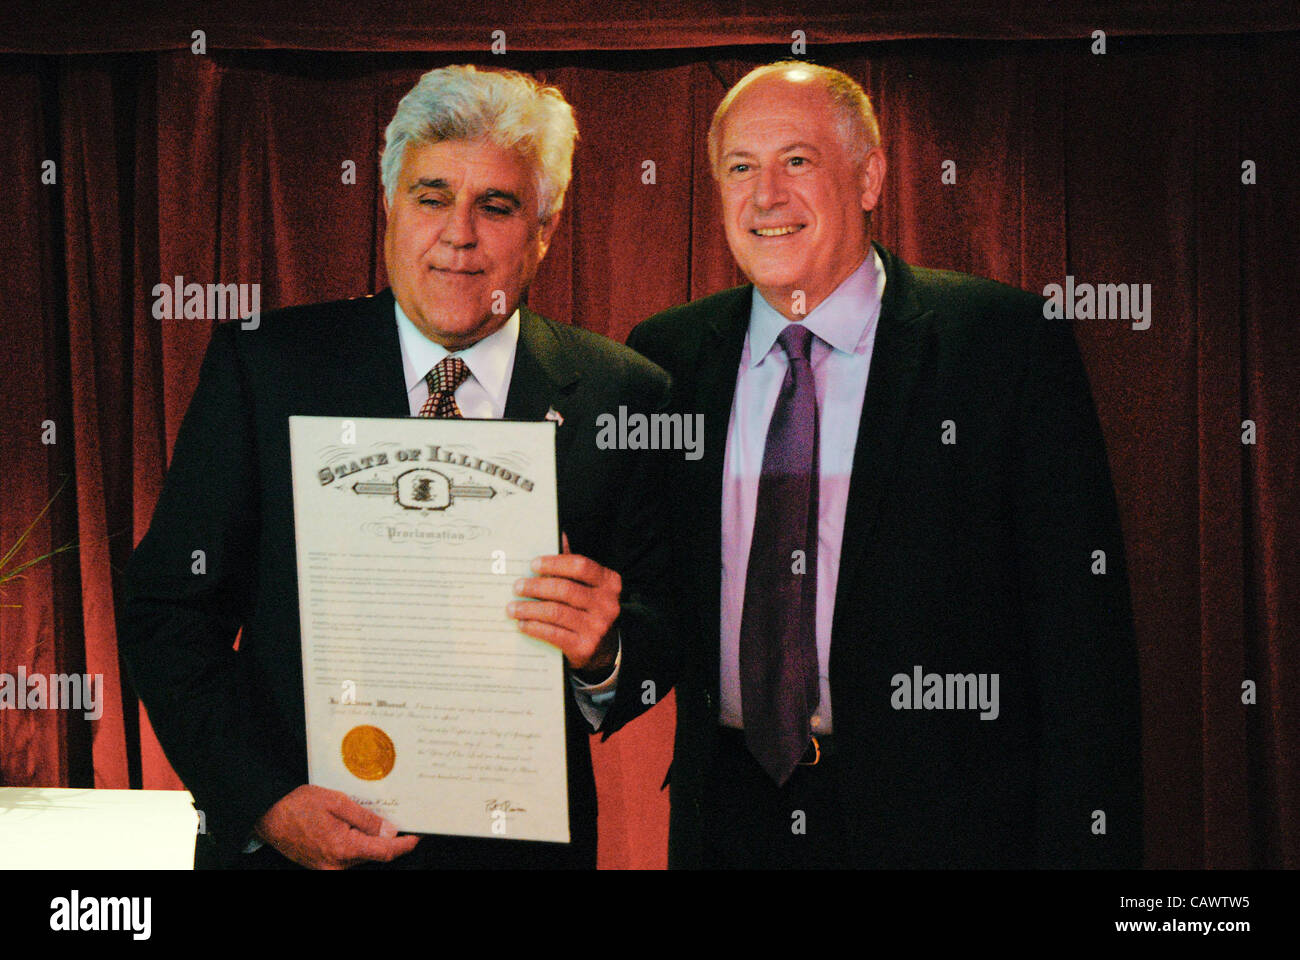 Jay Leno receives a proclation from the Governor of Illinois declaring Jay Leno Day in the state.  It was presented at a benefit for Omni Youth Services on April 28th which happens to be Jay Leno's  birthday. Stock Photo